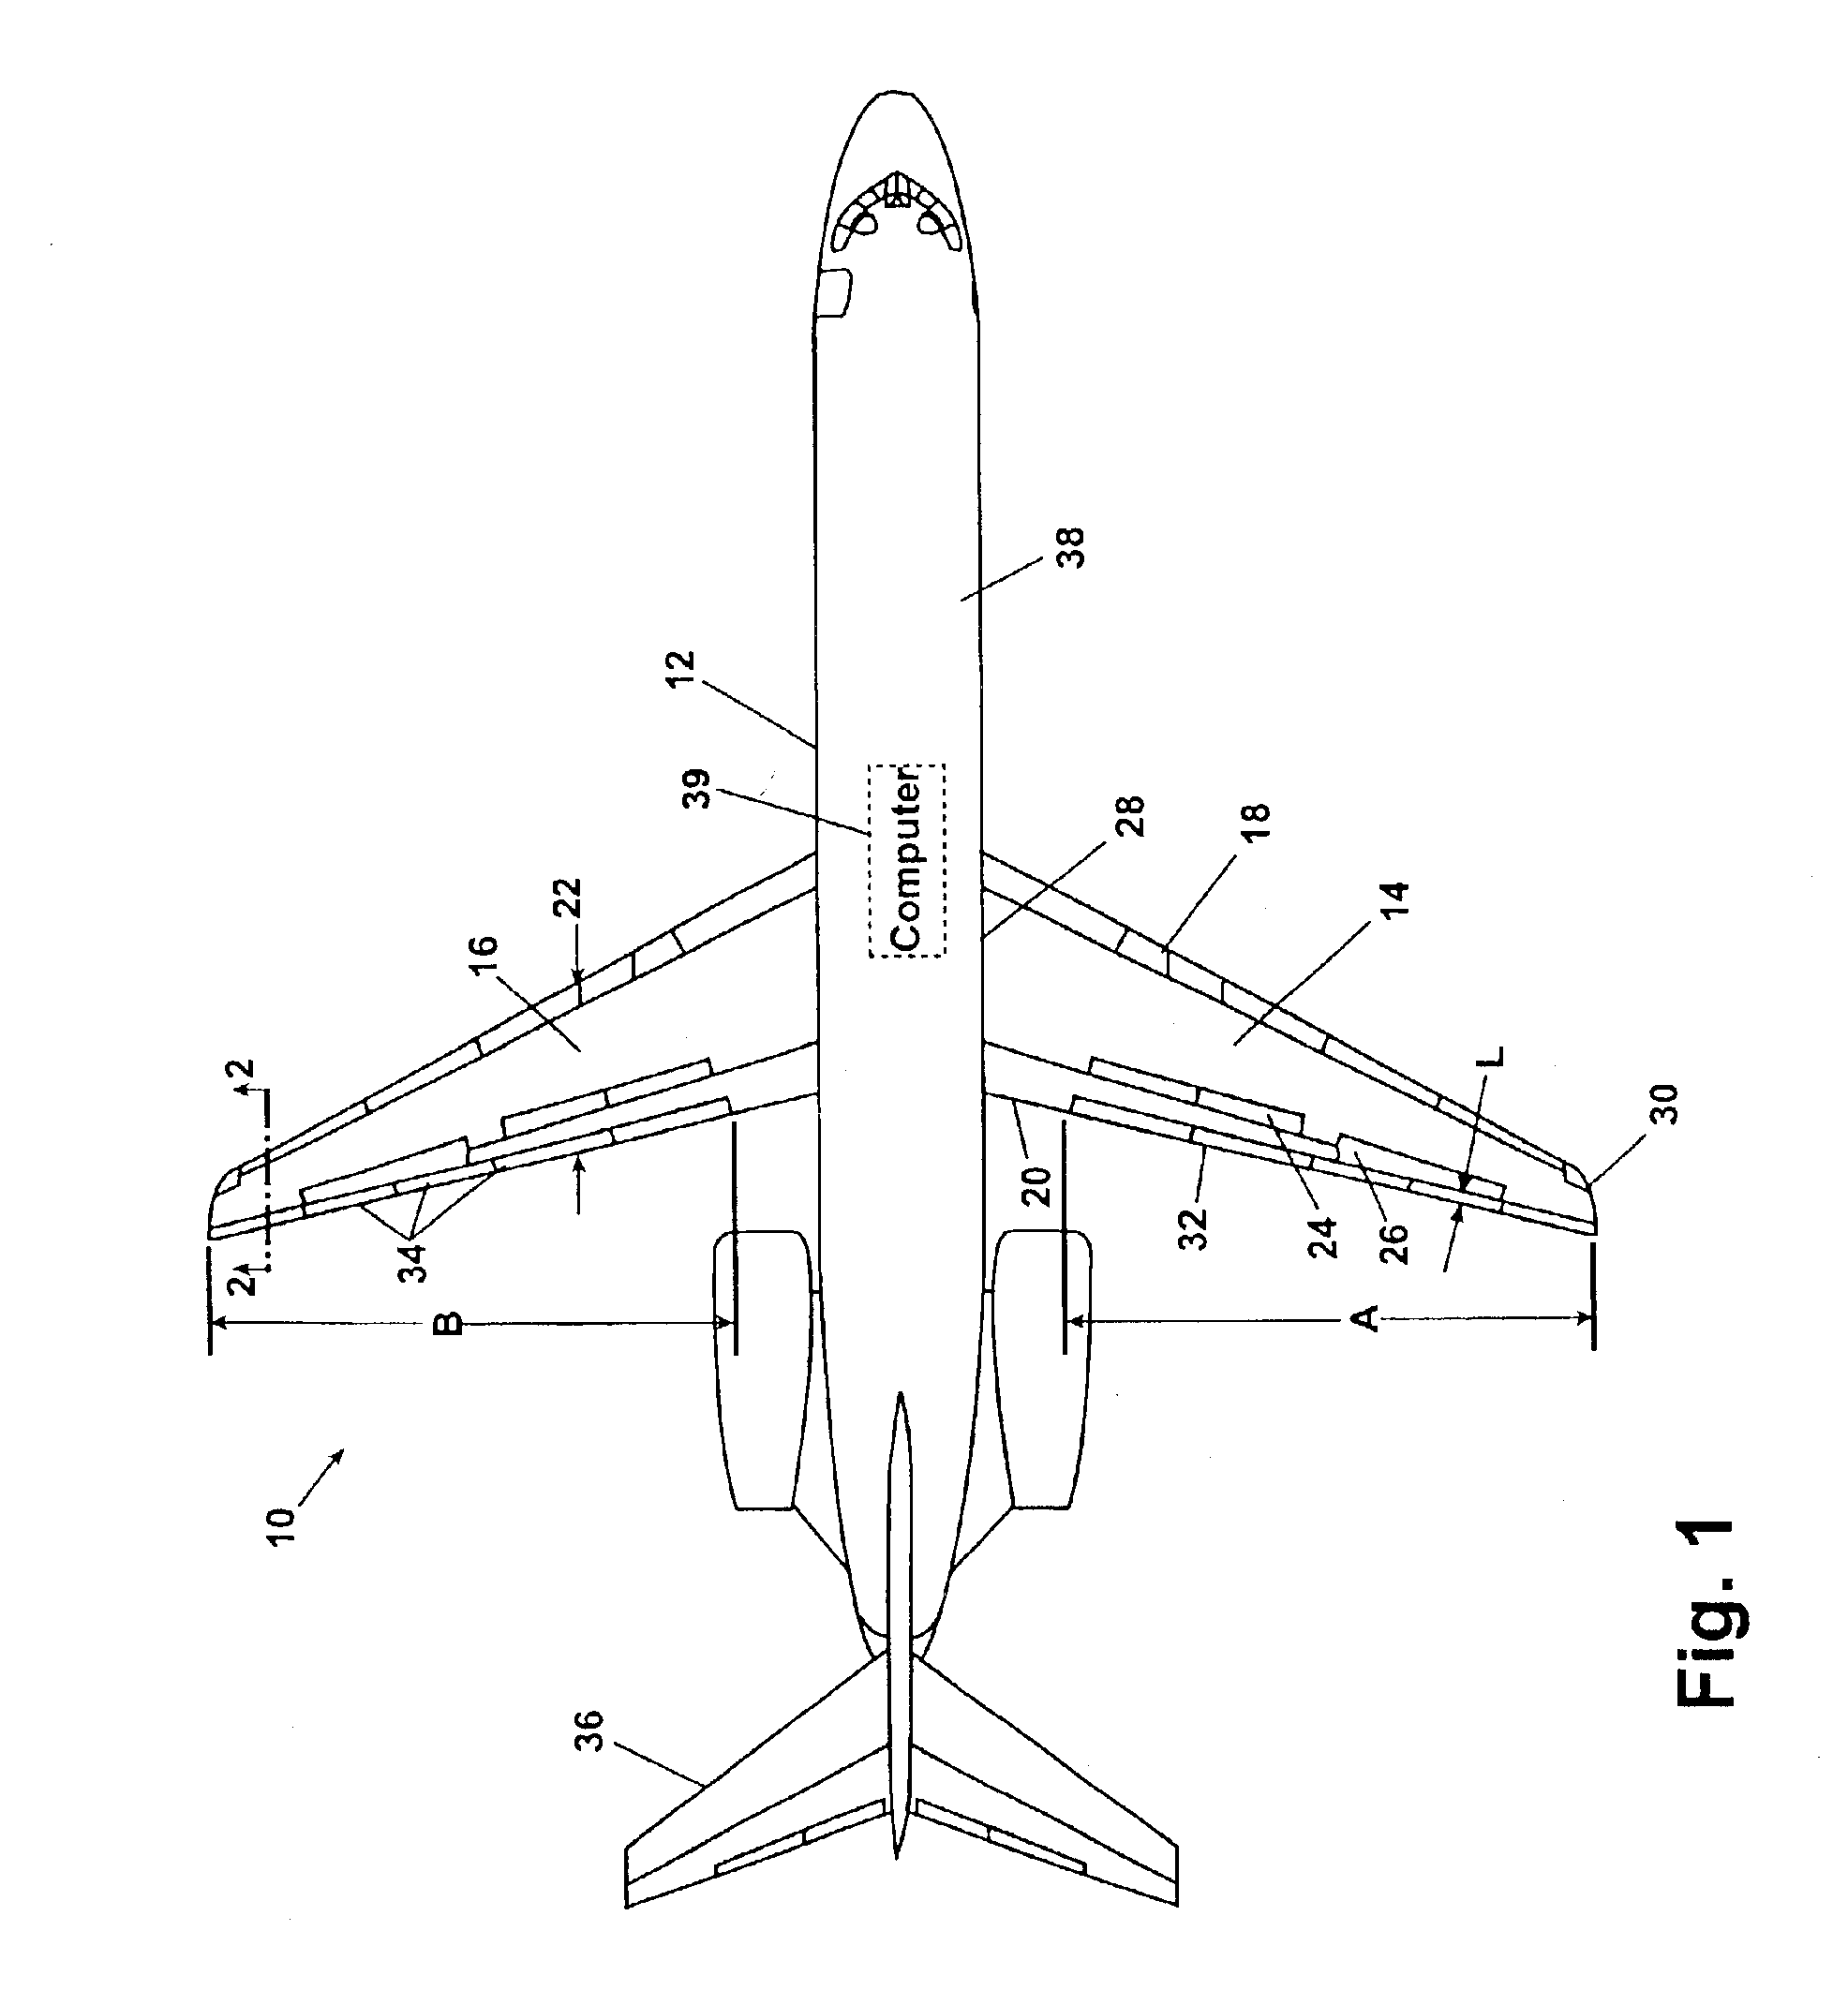 Variable trailing edge geometry and spanload control